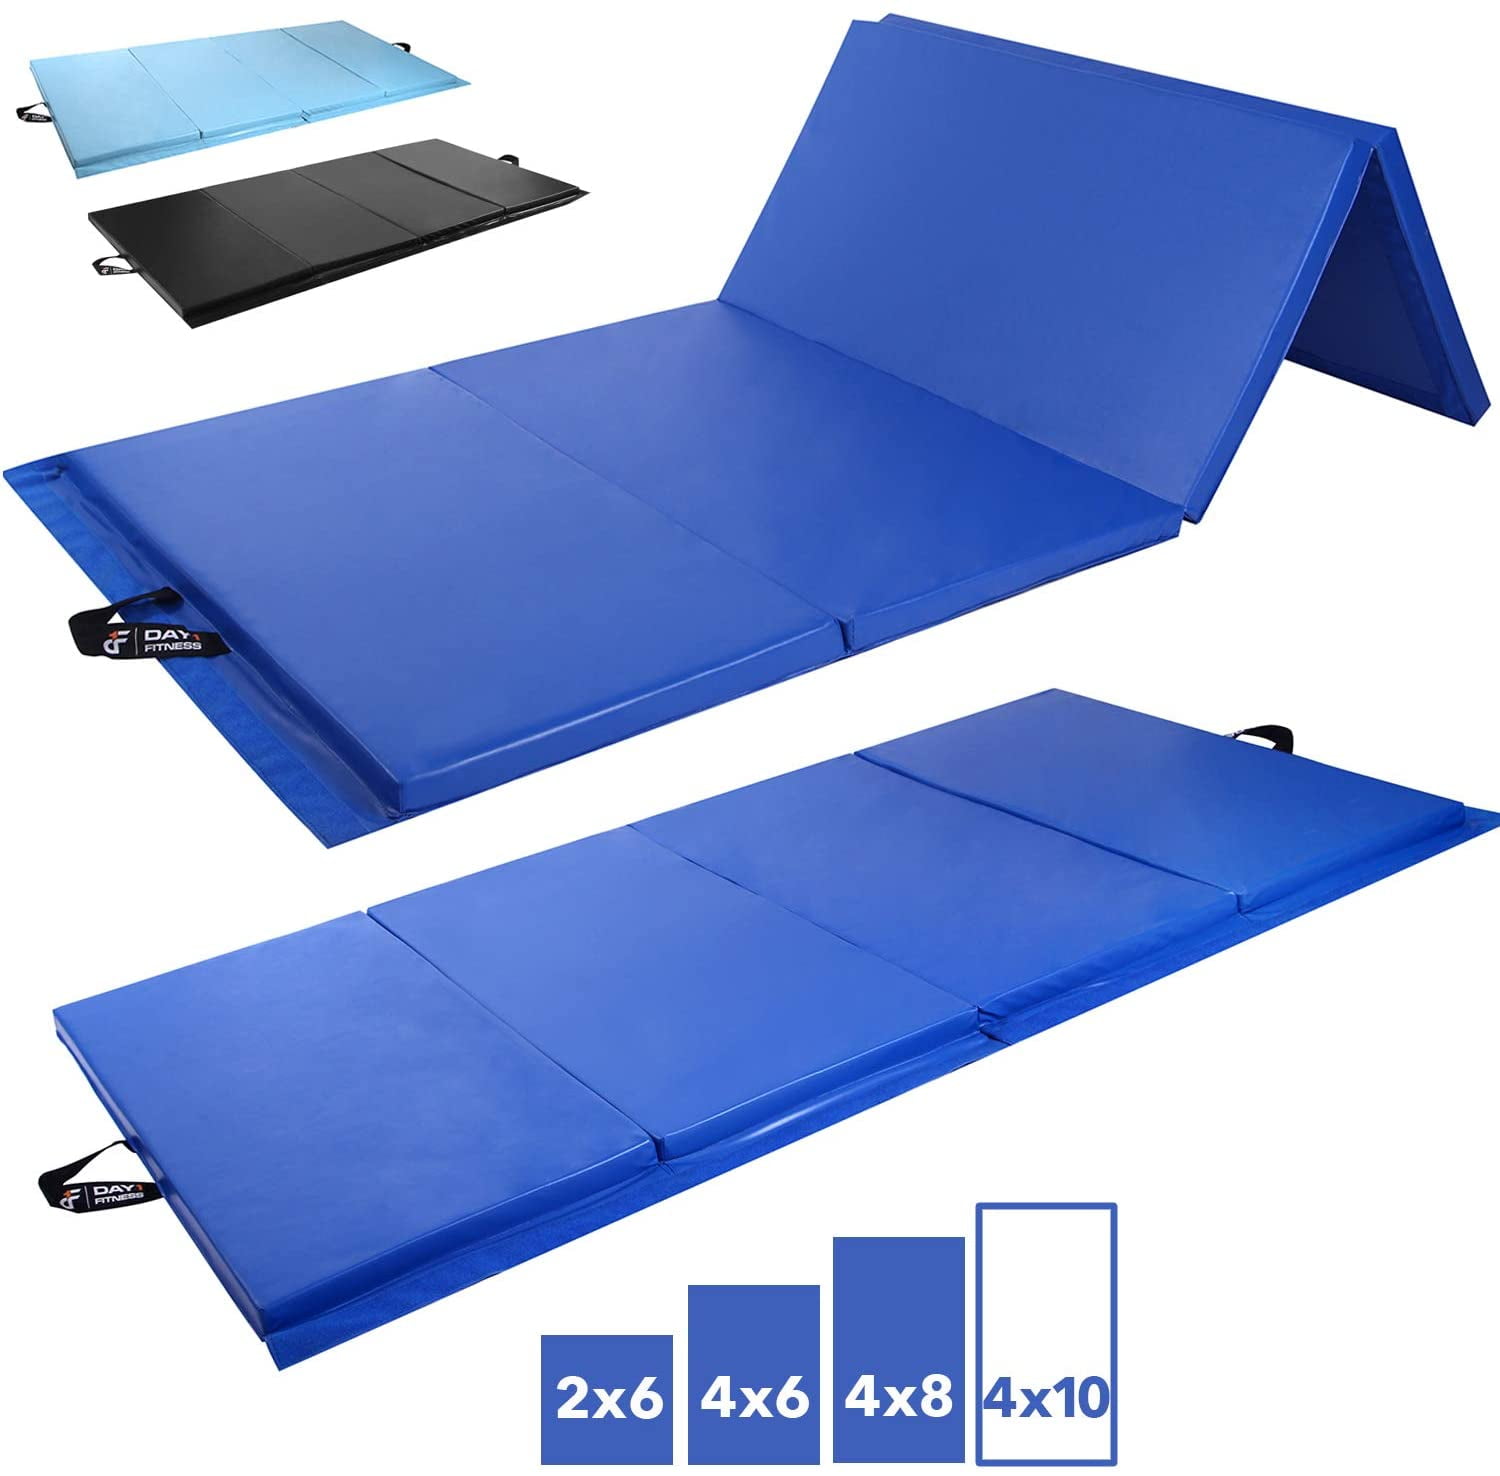 Exercise Yoga High-Density Foam Routines Eco-Friendly Foldable Pads Aerobics Crossfit Day 1 Fitness Folding Gym Mat for Workout Equipment Tumbling Mats 4x10 Black Gymnastics 